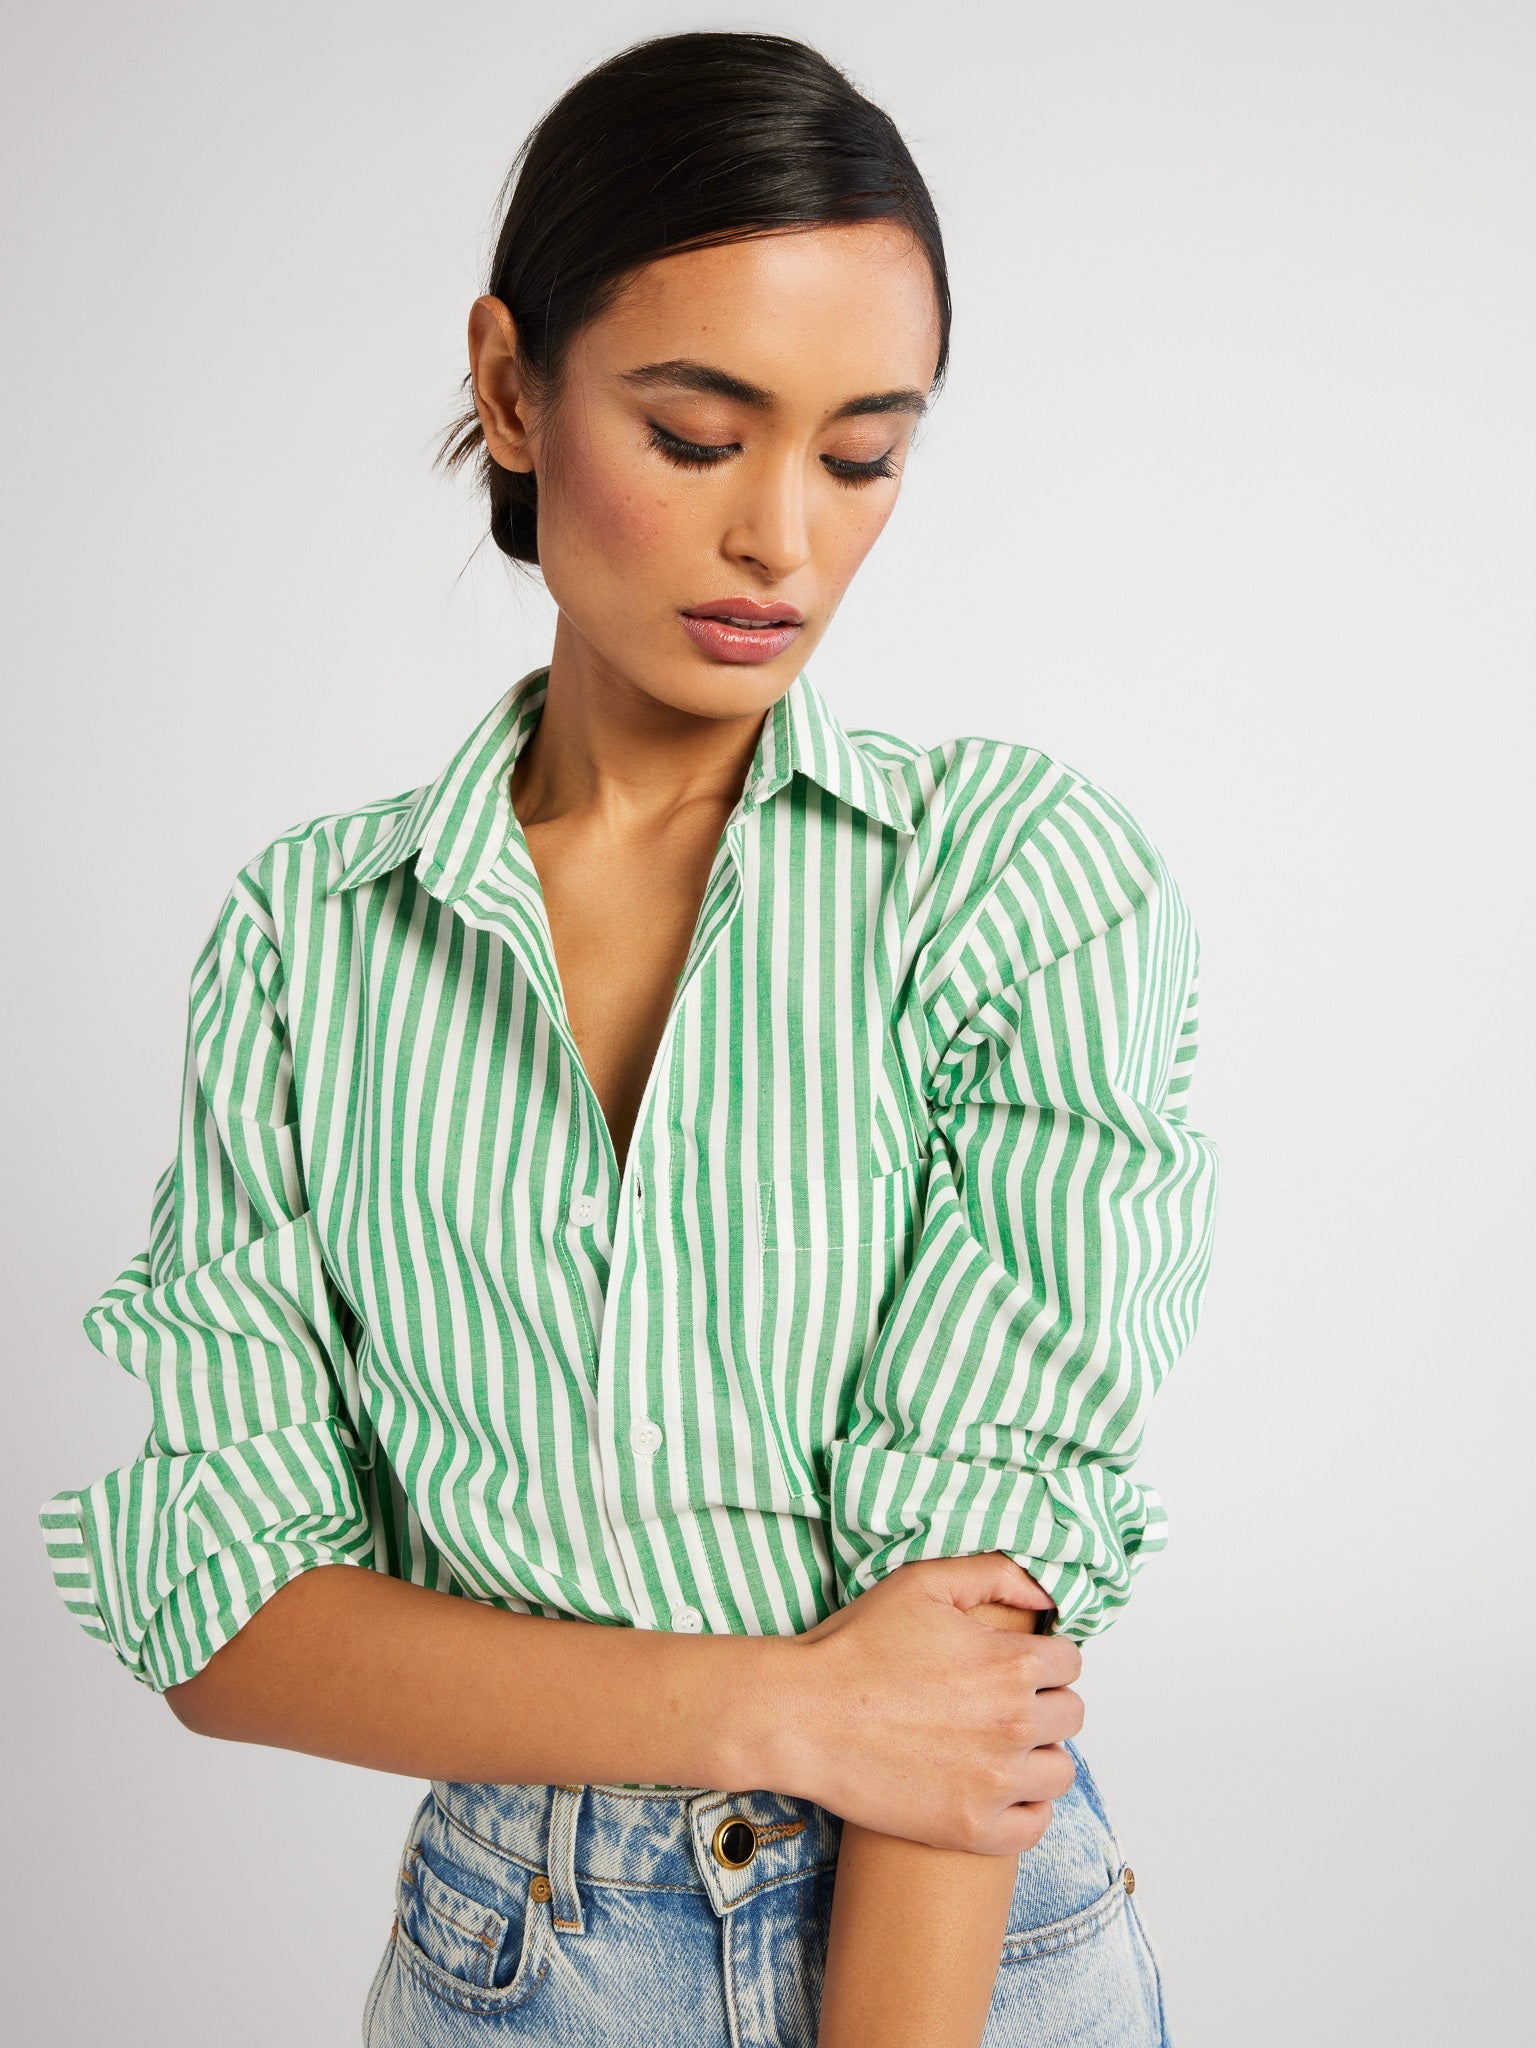 MILLE Clothing Sofia Top in Kelly Stripe